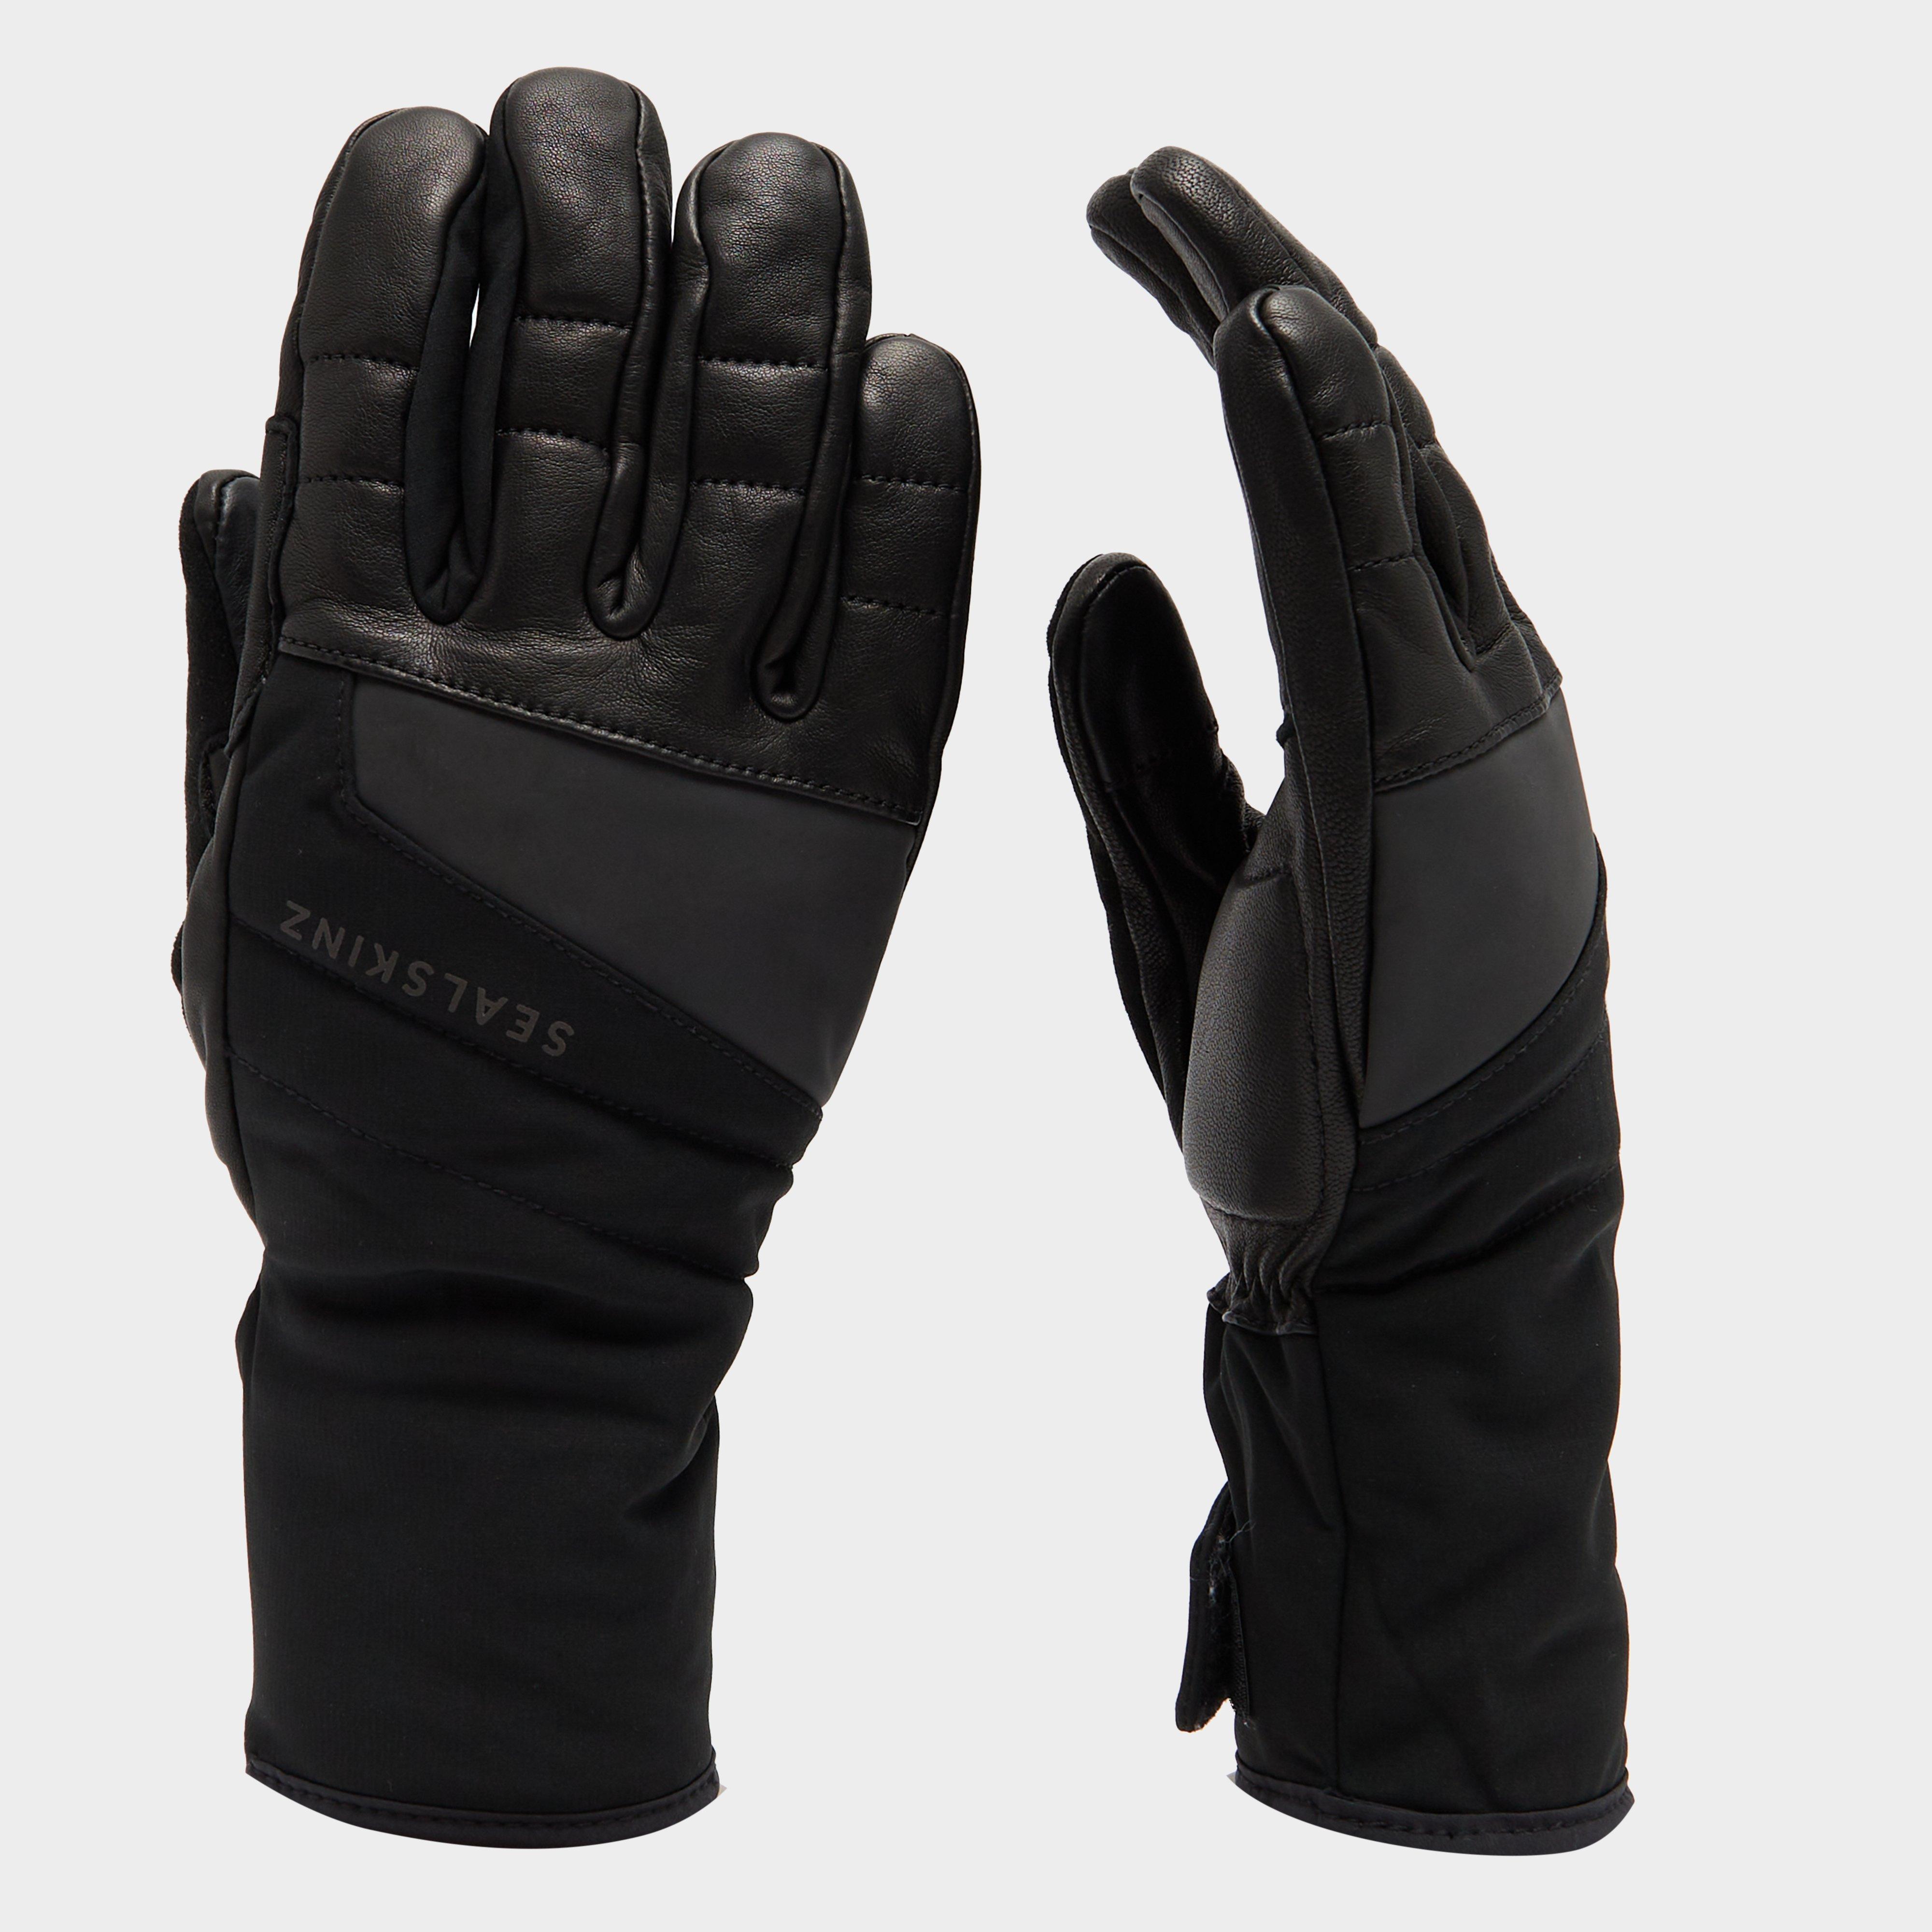 Photos - Other goods for tourism Waterproof Extreme Cold Weather Gauntlet in Black, Black 